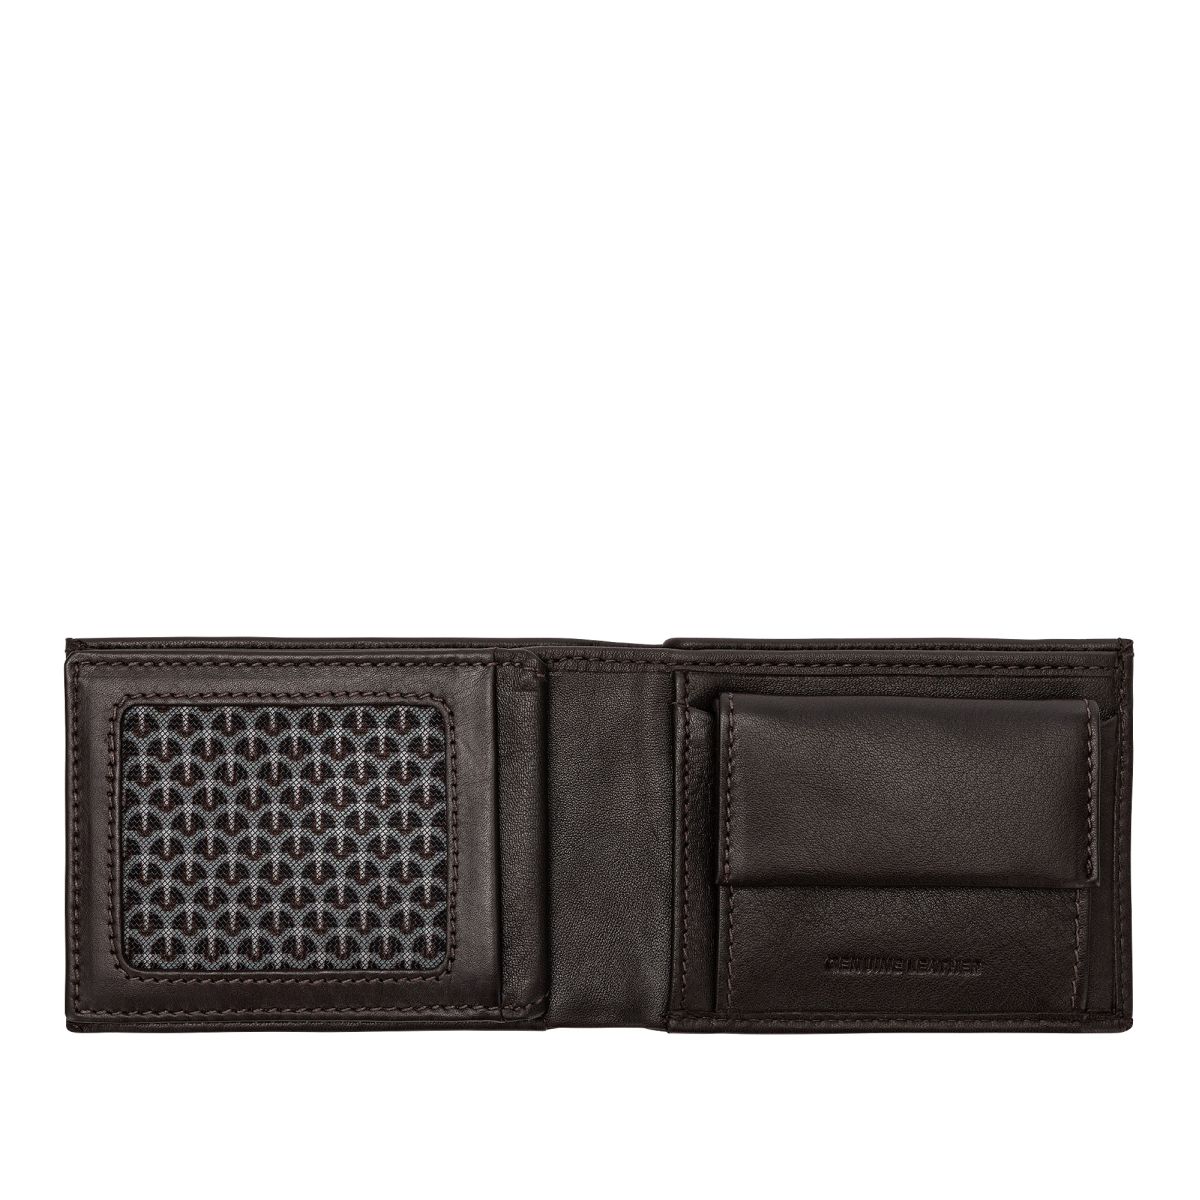 Small mens minimalist wallet with coins pocket - Dark Brown